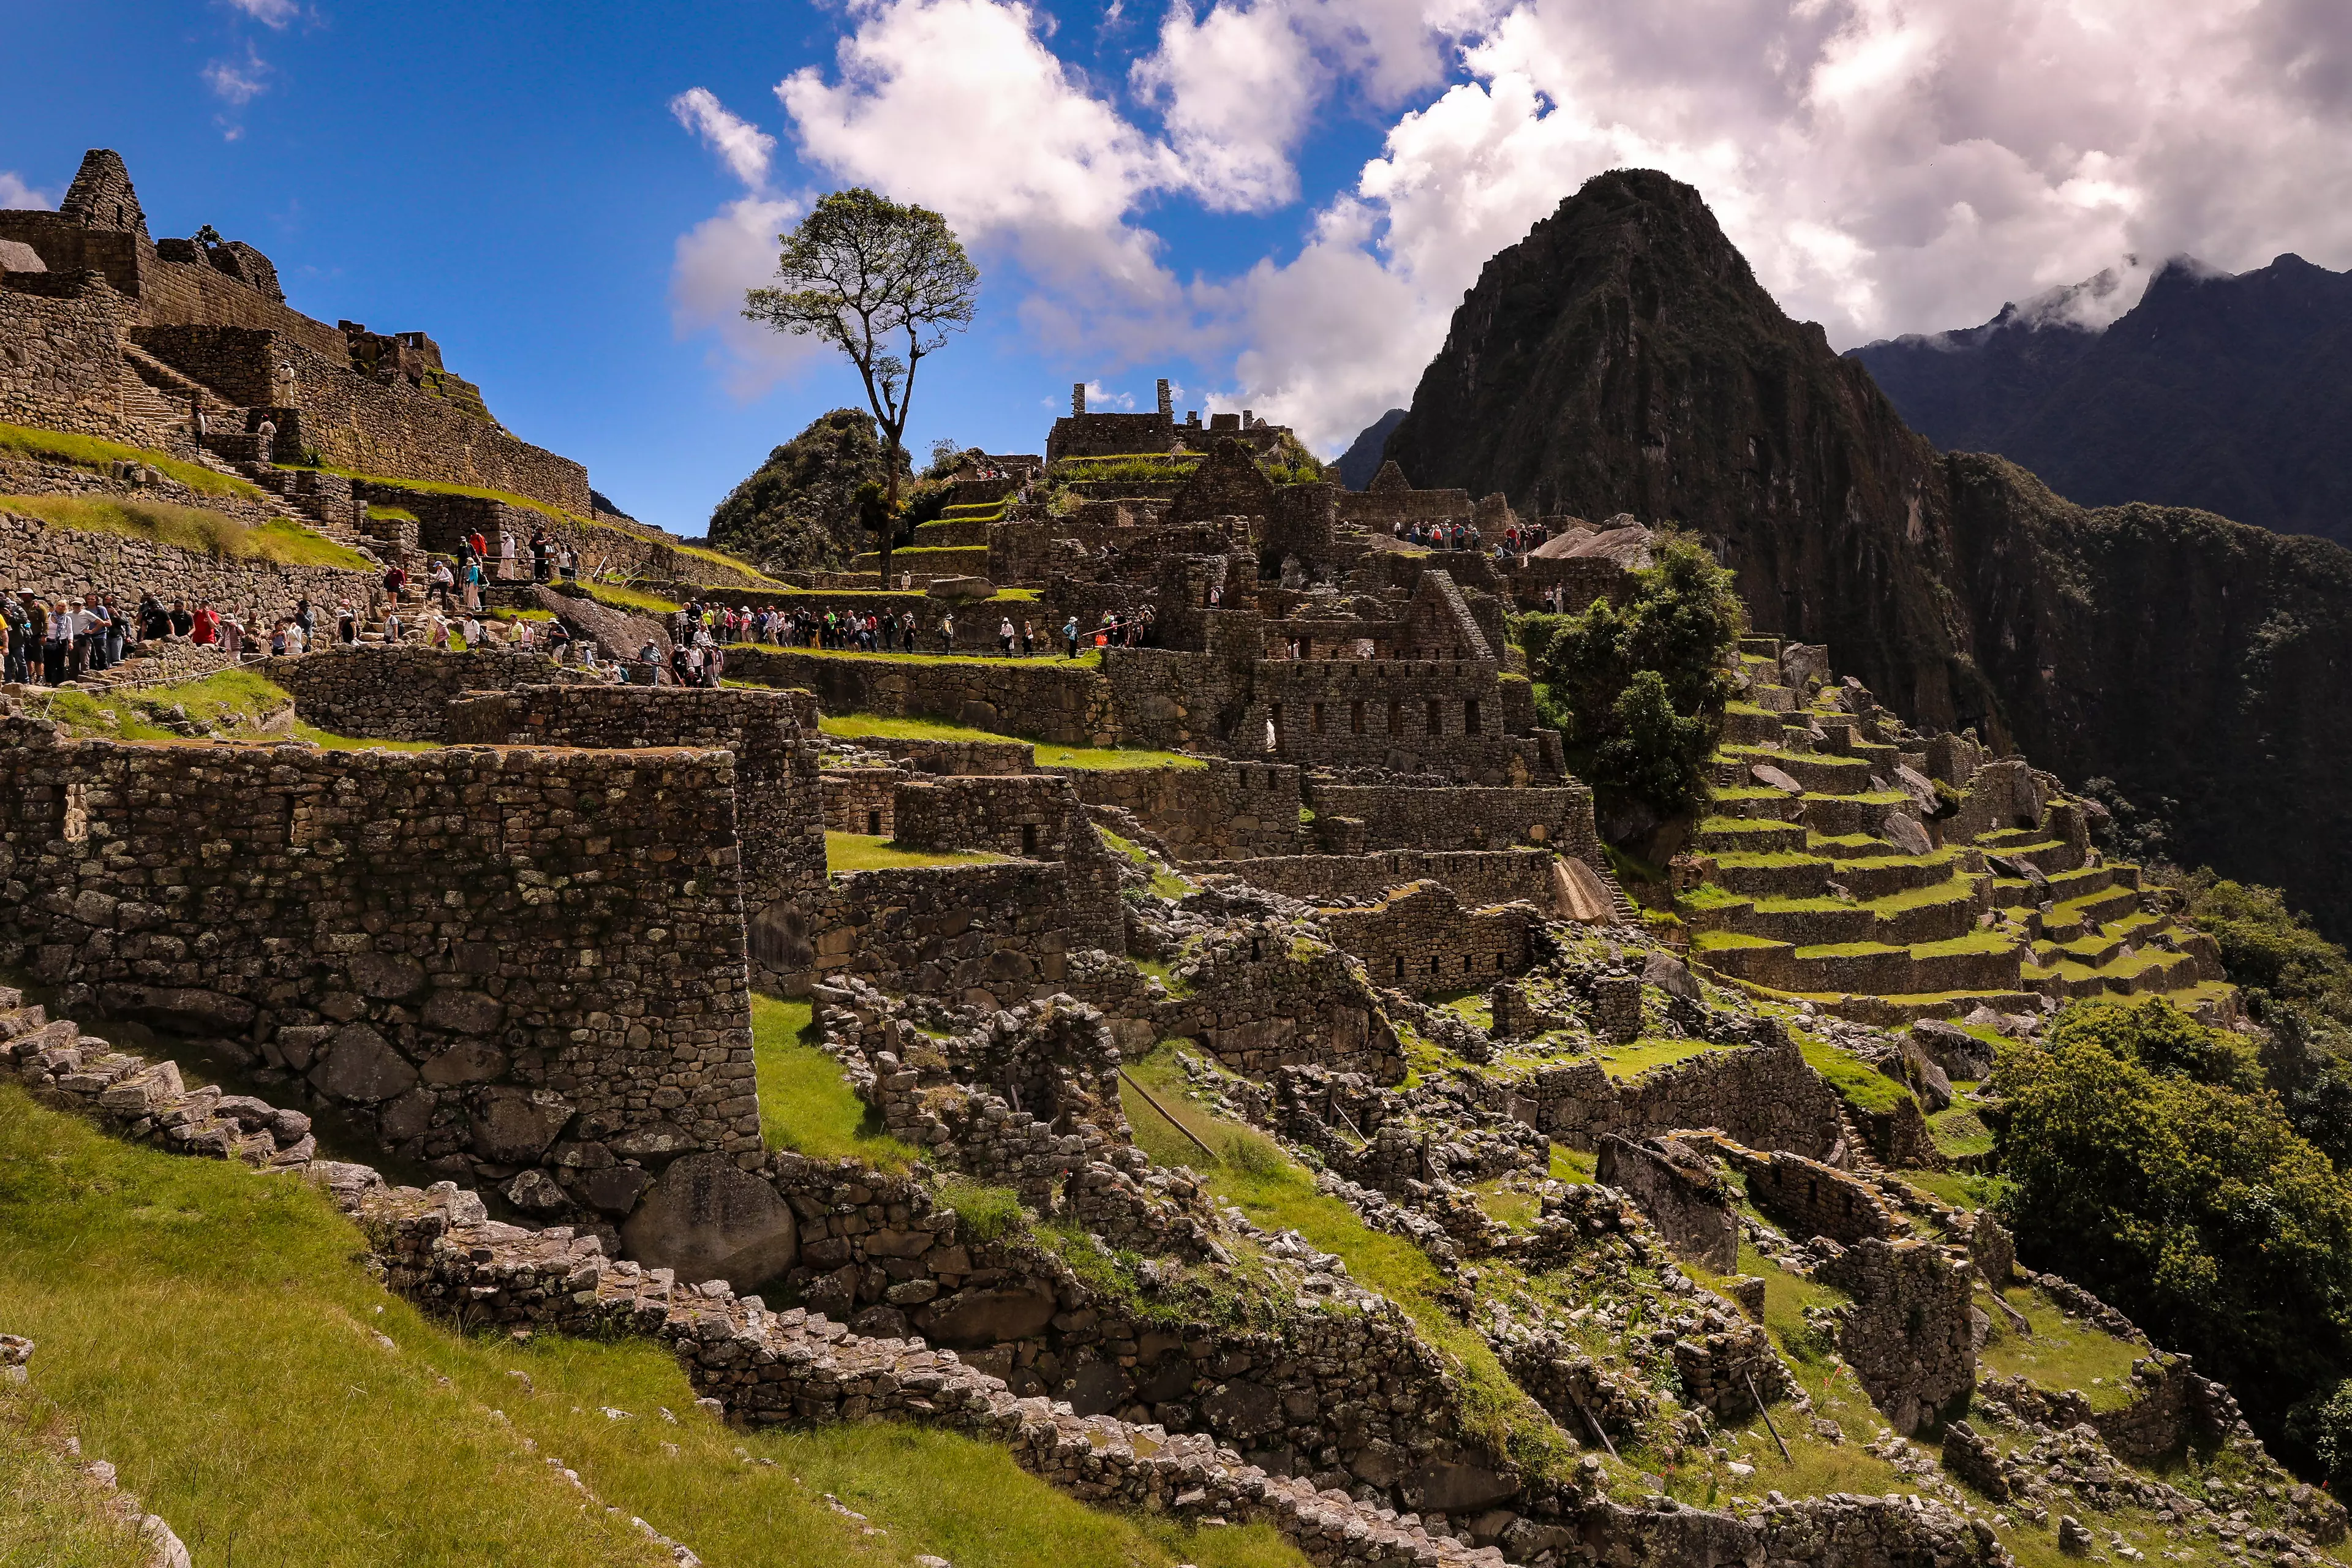 Machu Picchu is one of the seven new wonders of the world.